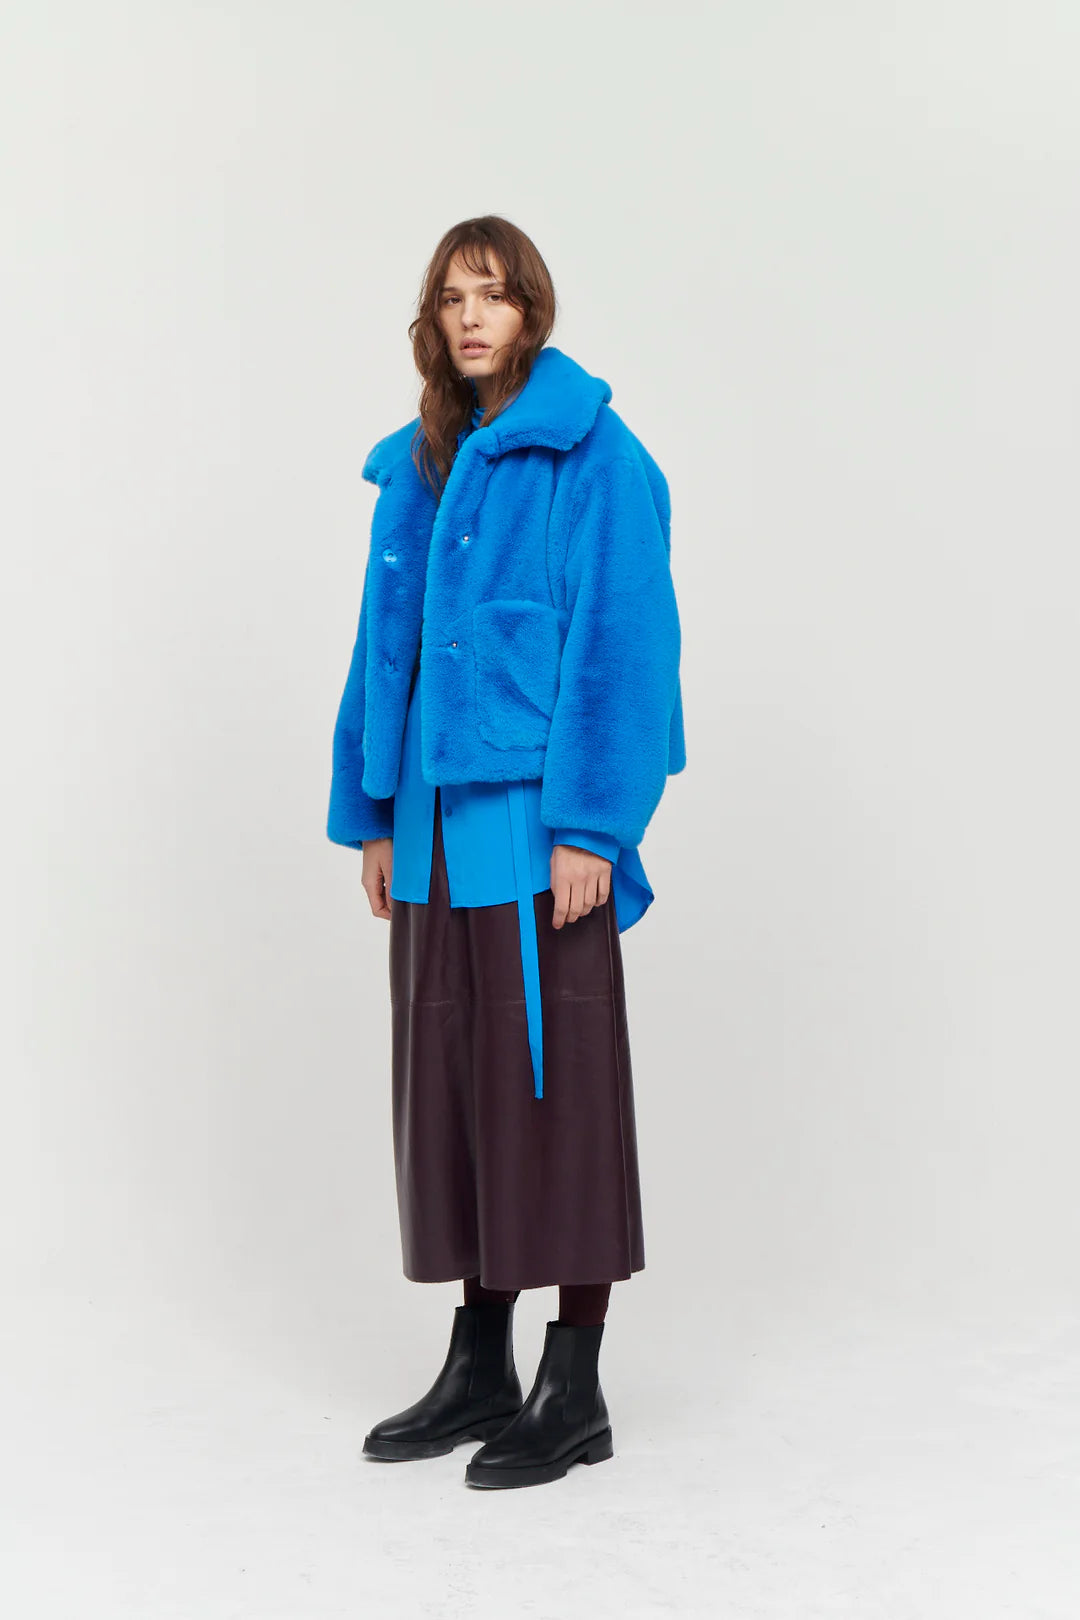 Bright blue boxy faux fur jacket with large collar and two front patch pockets